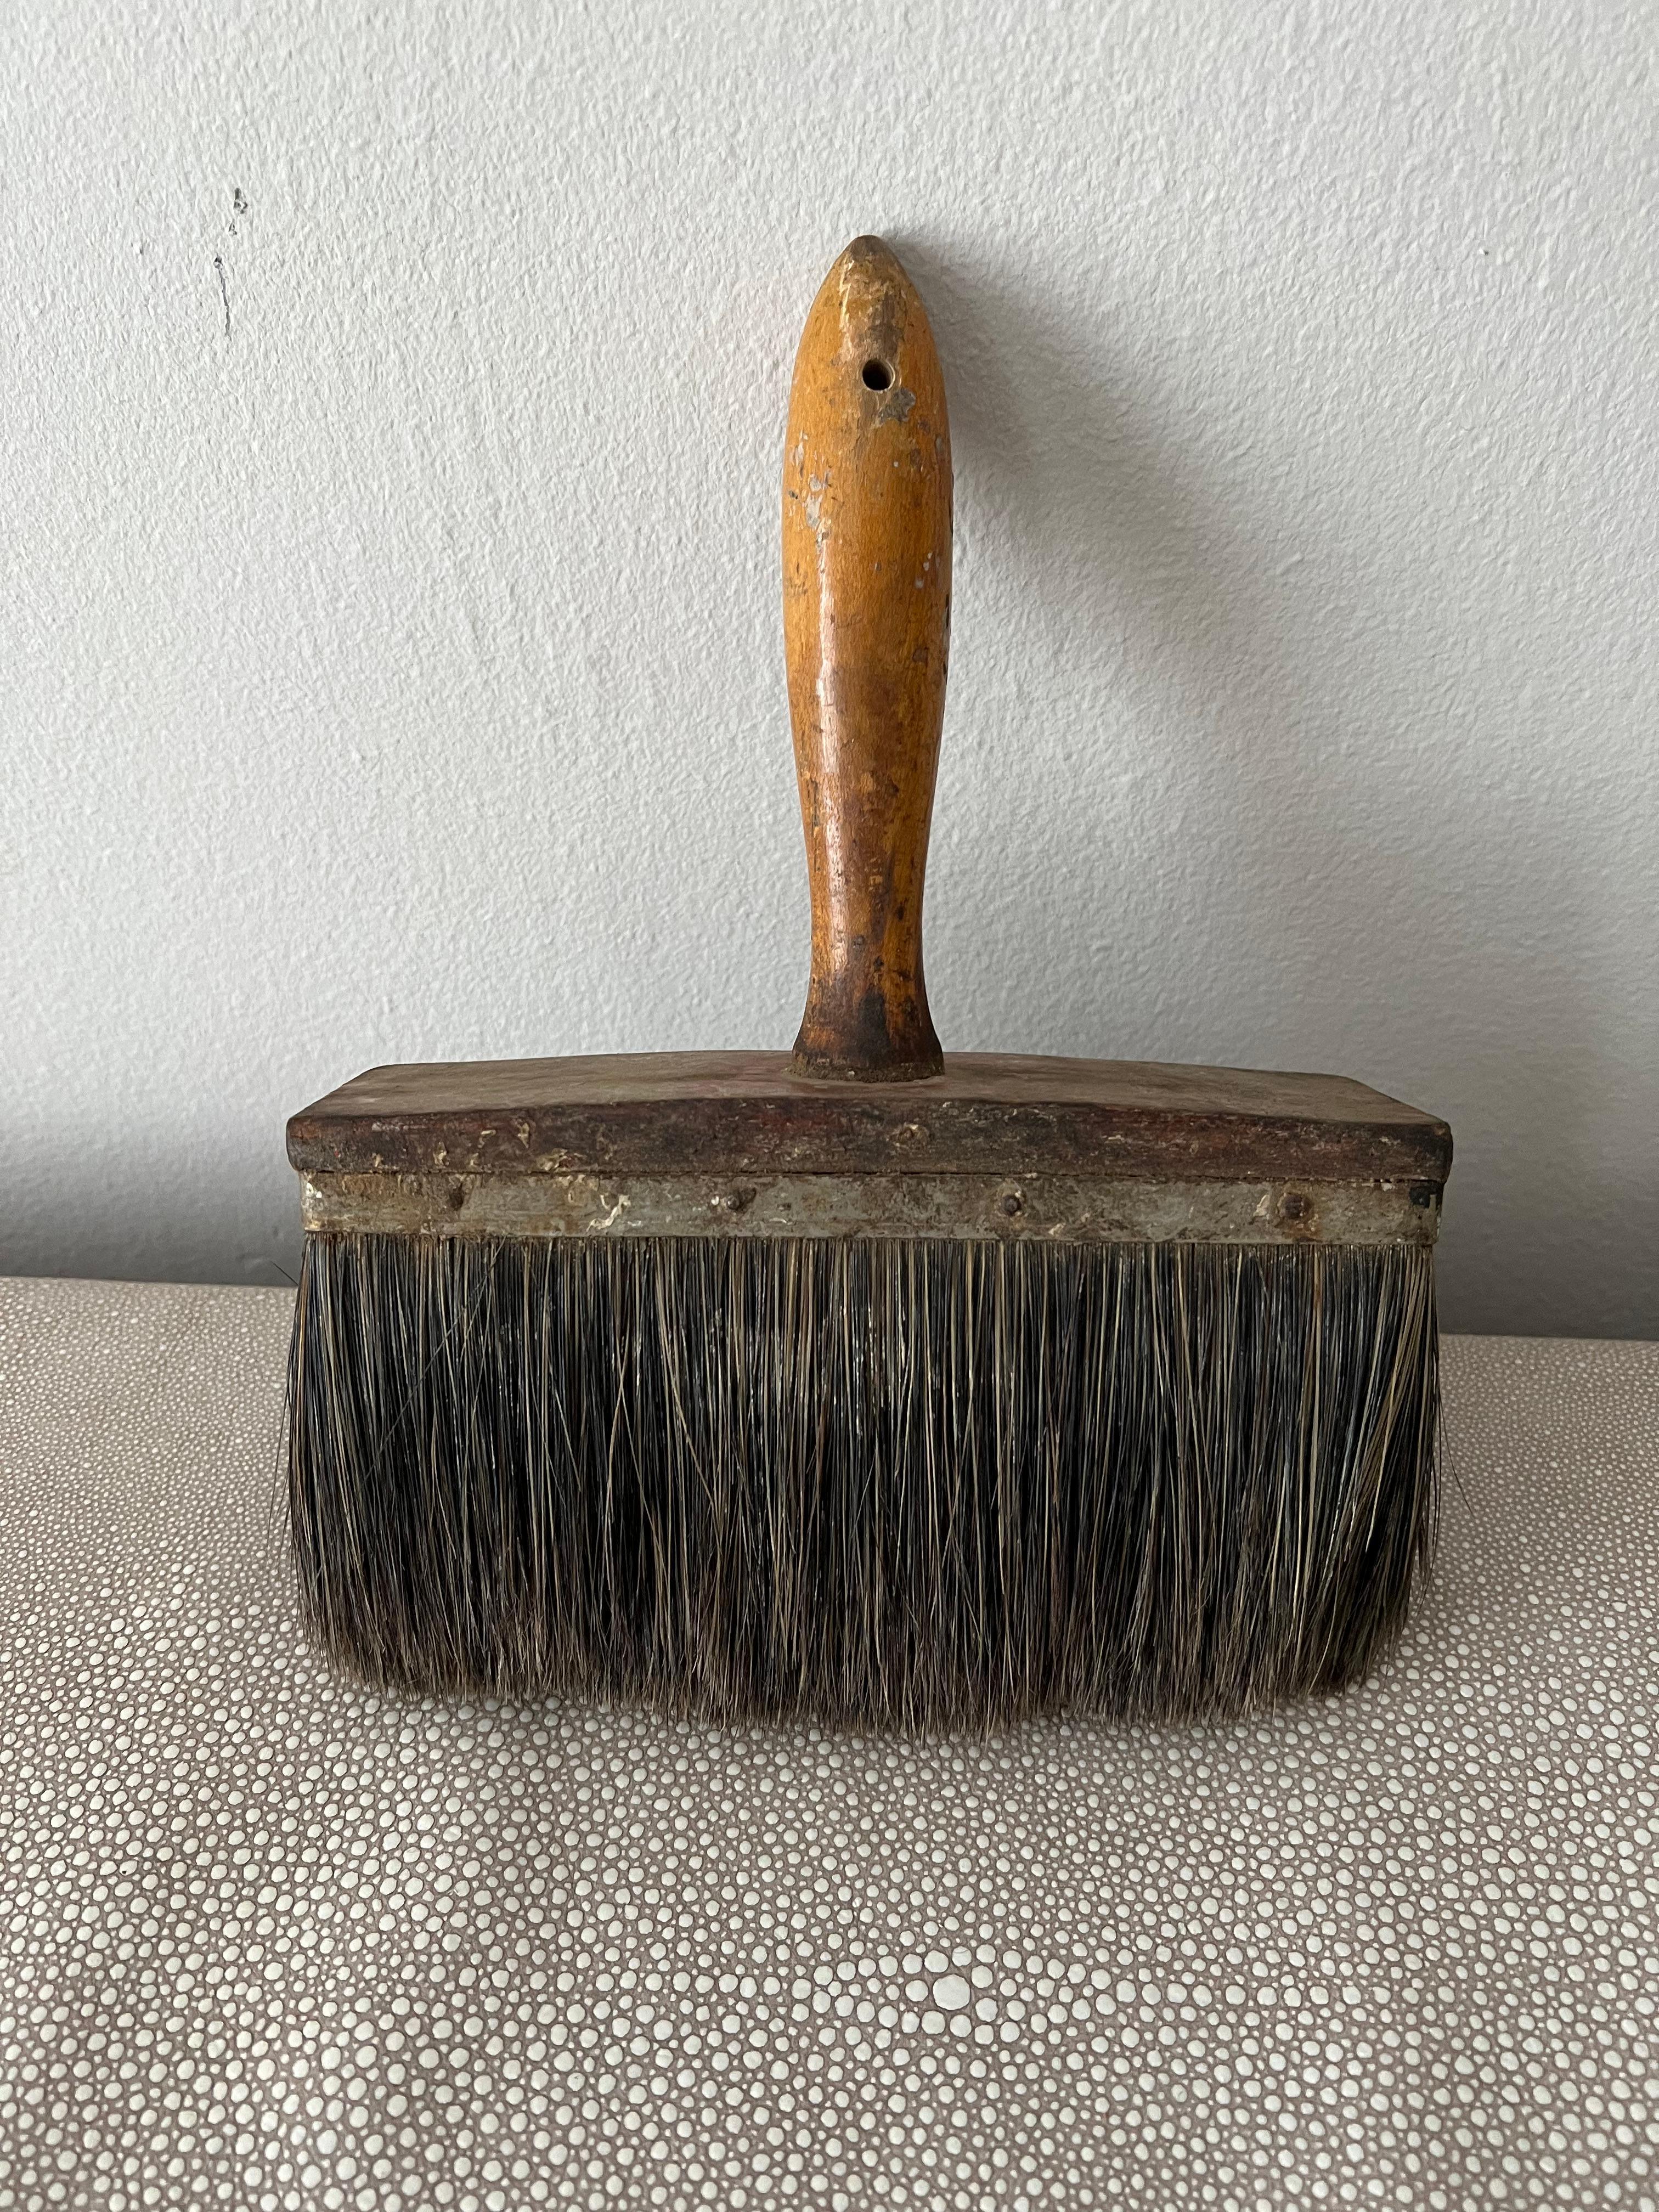 20th Century Patinated Wooden Handle Paint Brush For Sale